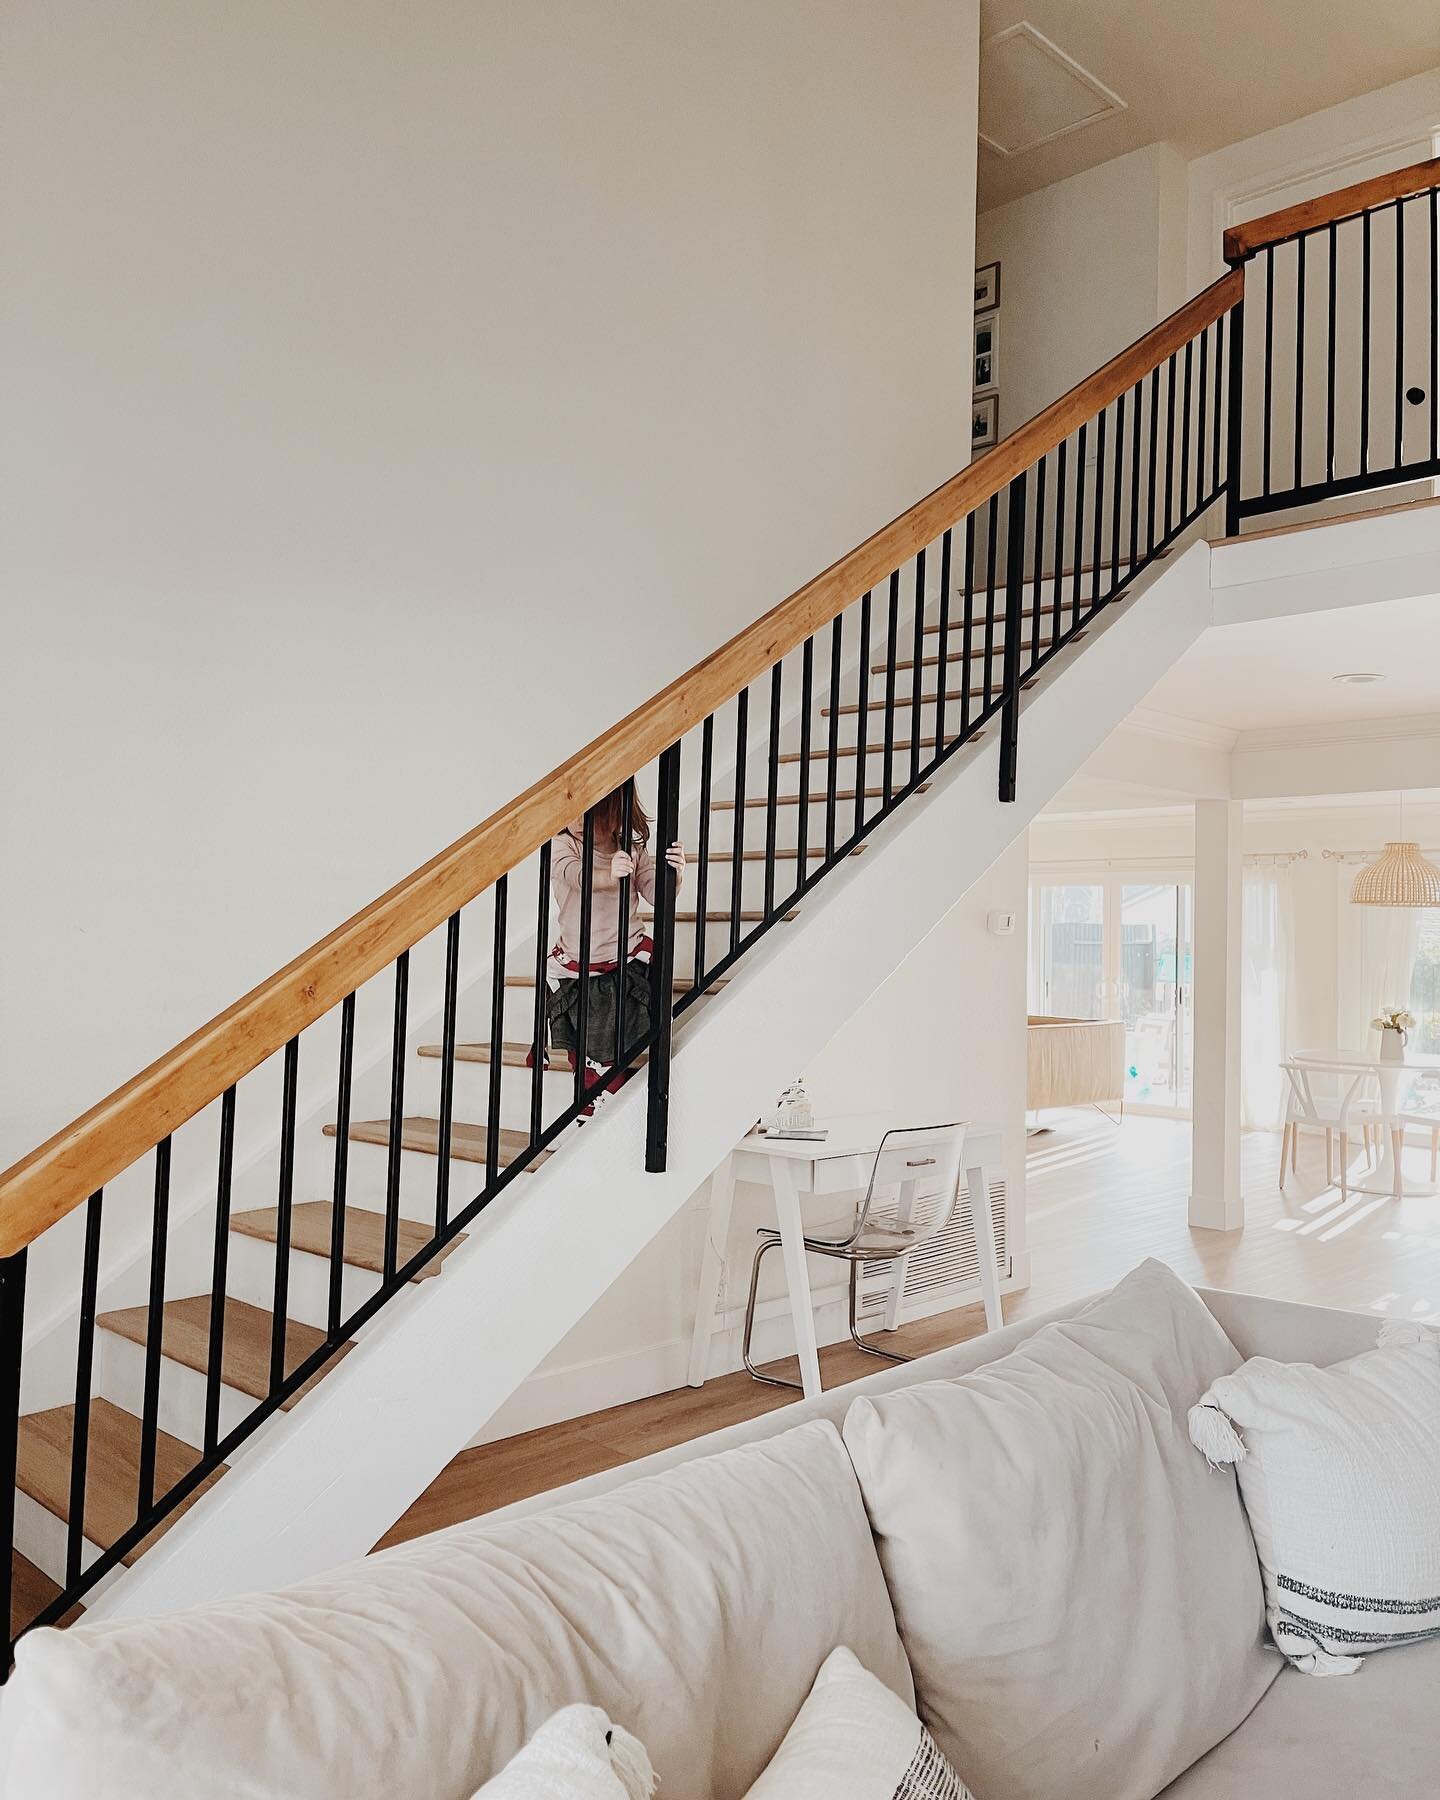 I look at these stairs and I don&rsquo;t just see a set of stairs or another home project. I look at it and I think of the handrail, sanded and oiled by our good friend Monty Kelso. I think of the stair backings, installed by pastor and friend Brick,